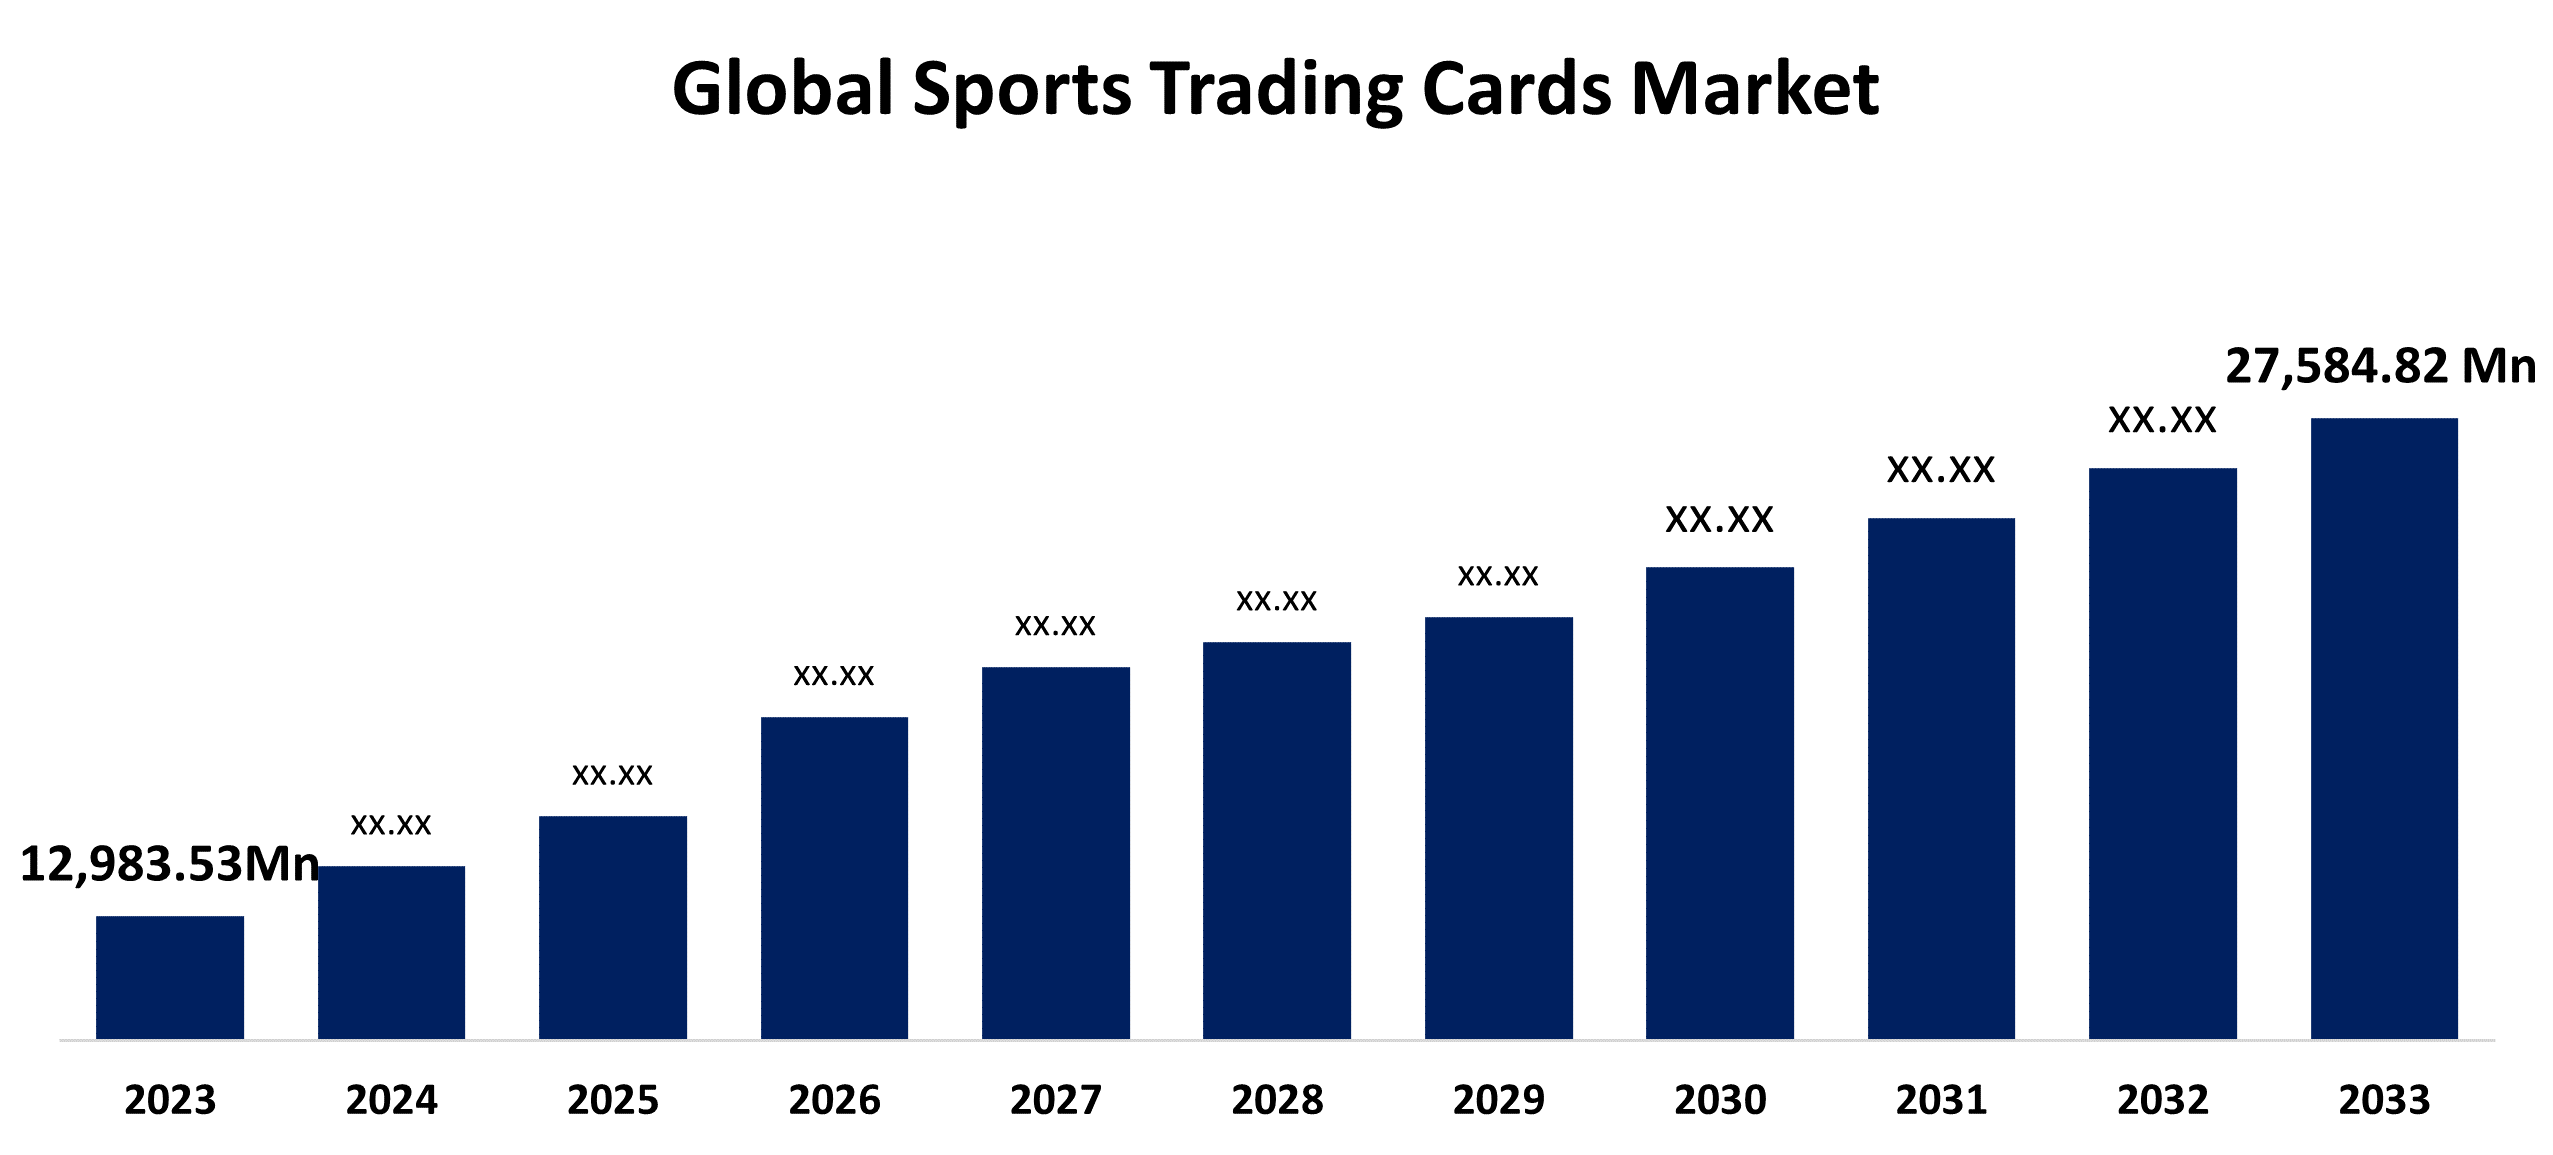 Global Sports Trading Cards Market